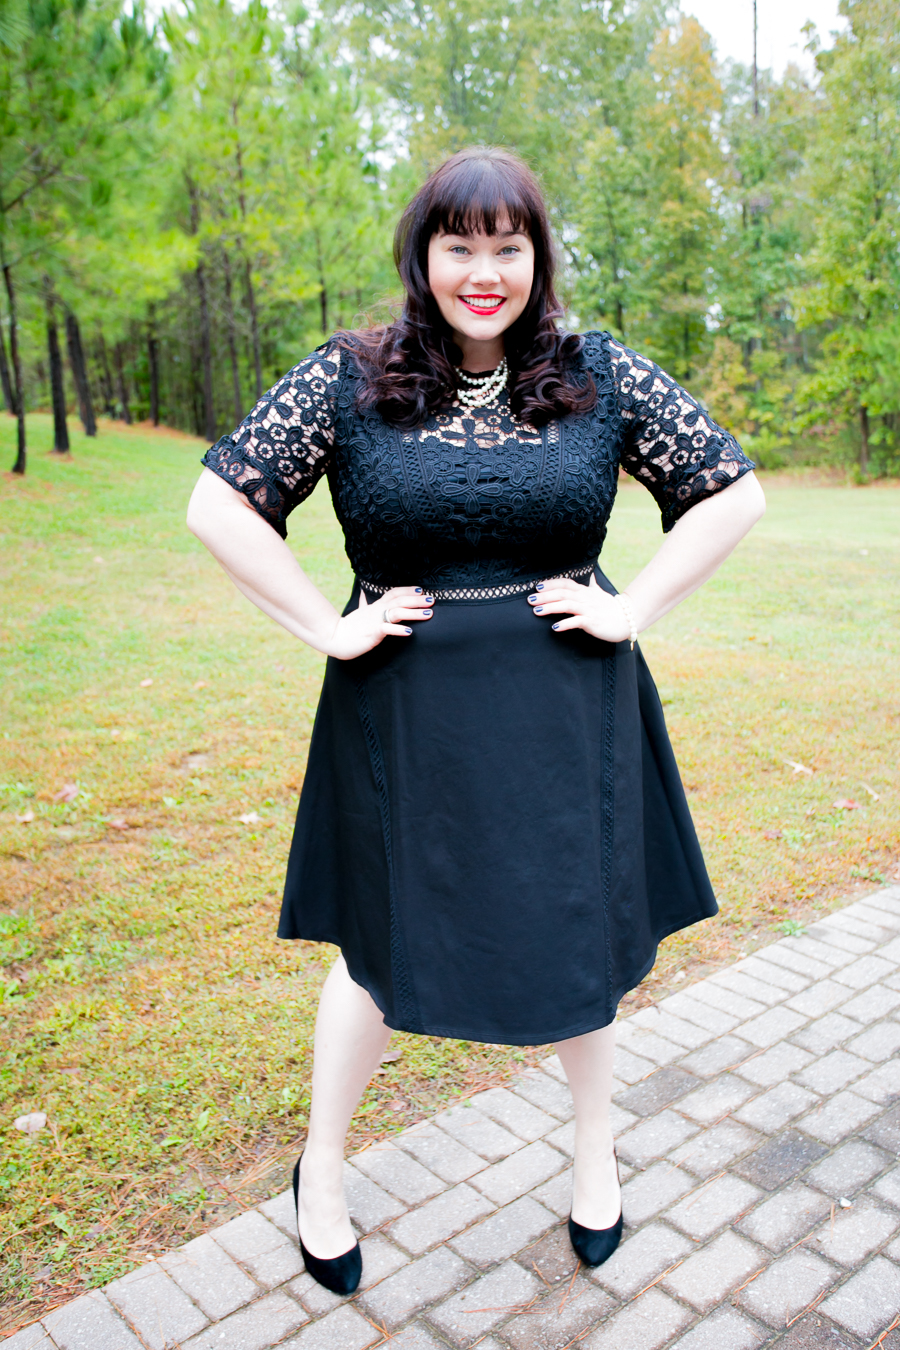 Plus Size OOTD, Asos Curve, Lace Dress, LBD, Plus Size Style, Plus Size Fashion, Style Plus Curves, Chicago Blogger, Chicago Plus Size Blogger, Plus Size Blogger, Amber McCulloch